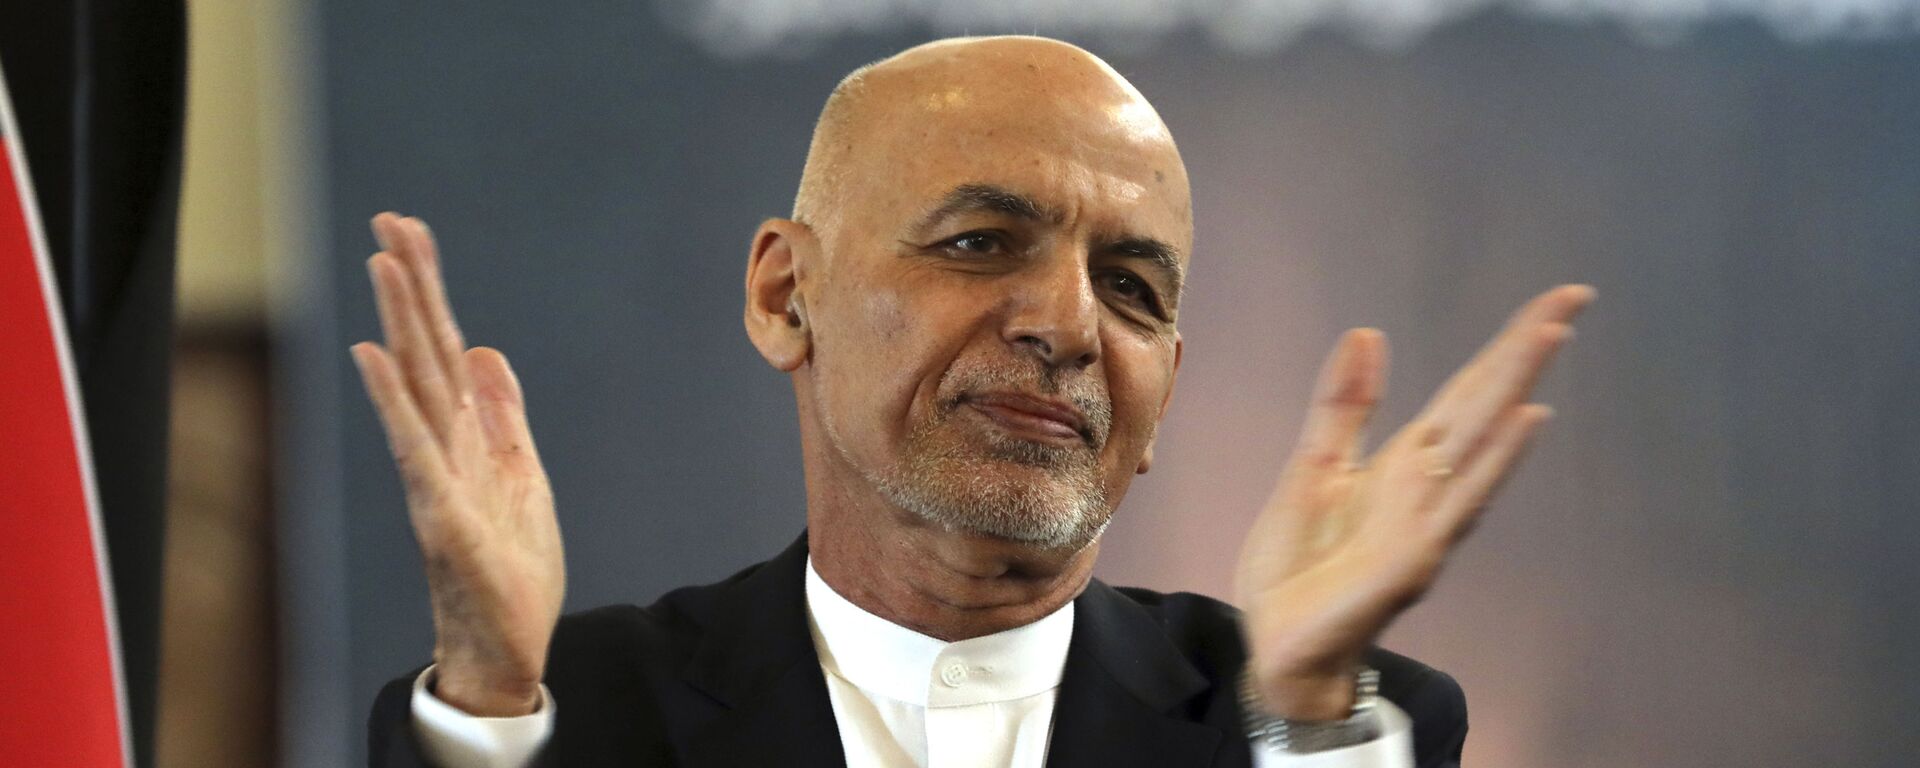 FILE - In this March 21, 2021 file photo, Afghan President Ashraf Ghani speaks during a ceremony celebrating the Persian New Year, Nowruz at the presidential palace in Kabul, Afghanistan. Afghanistan’s embattled president left the country Sunday, Aug. 15, 2021, joining his fellow citizens and foreigners in a stampede fleeing the advancing Taliban and signaling the end of a 20-year Western experiment aimed at remaking Afghanistan.  - Sputnik International, 1920, 21.08.2021